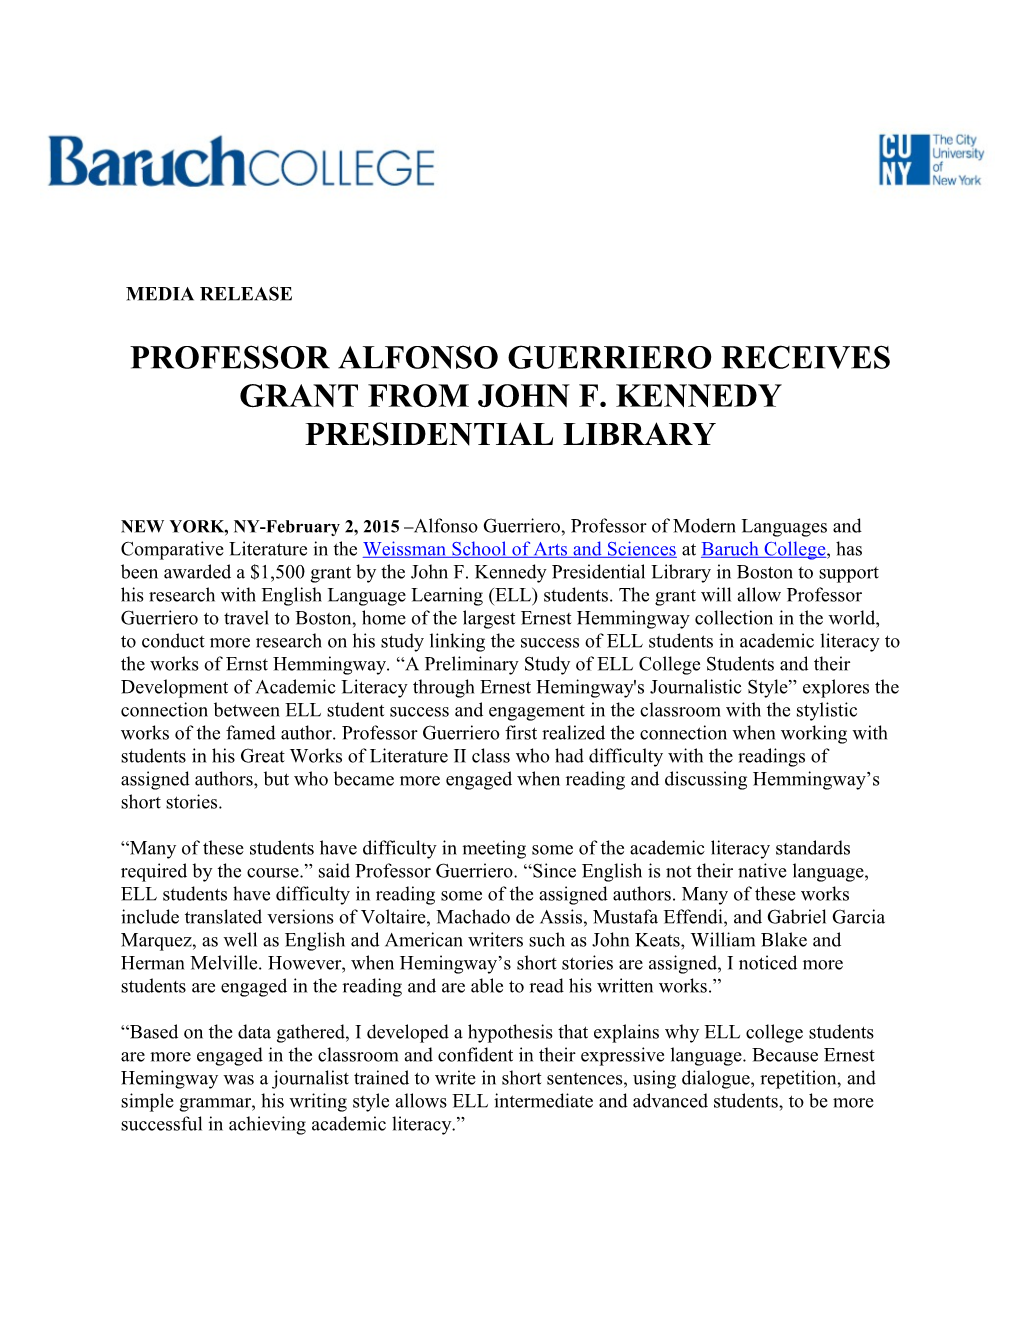 Professor Alfonso Guerriero Receives Grant from John F. Kennedy Presidential Library